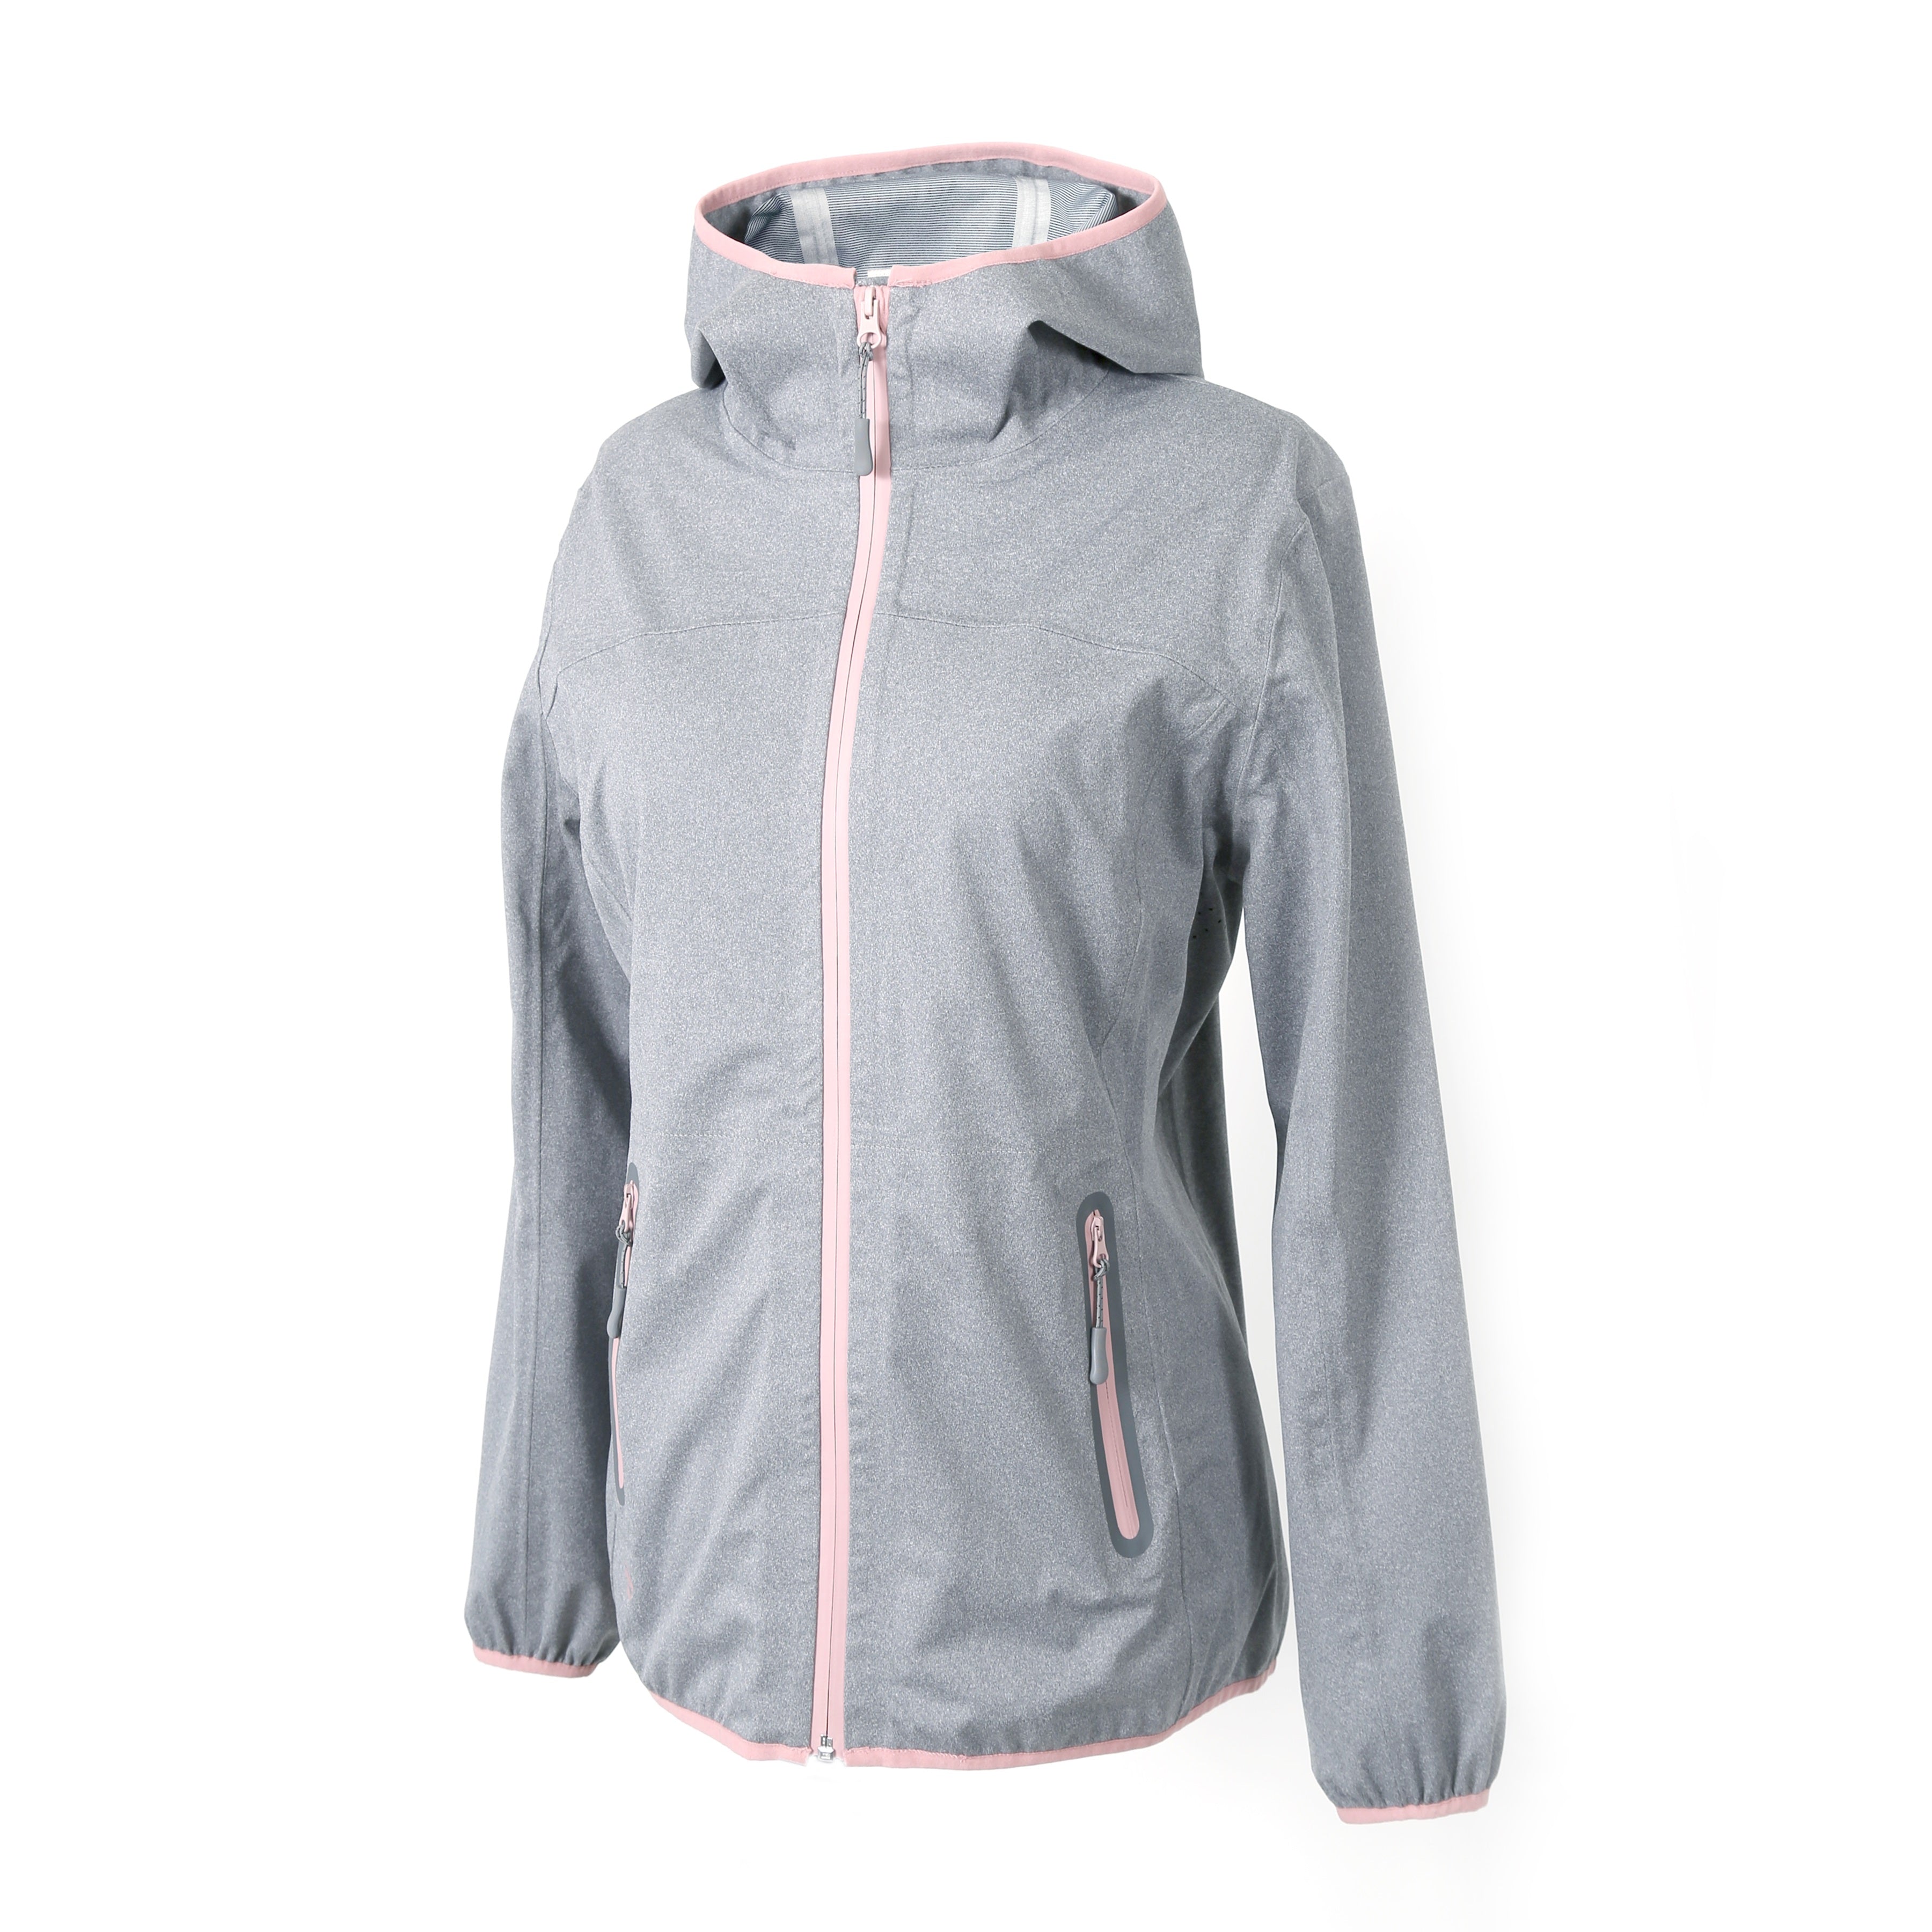 3 layers breathable jacket - Women's